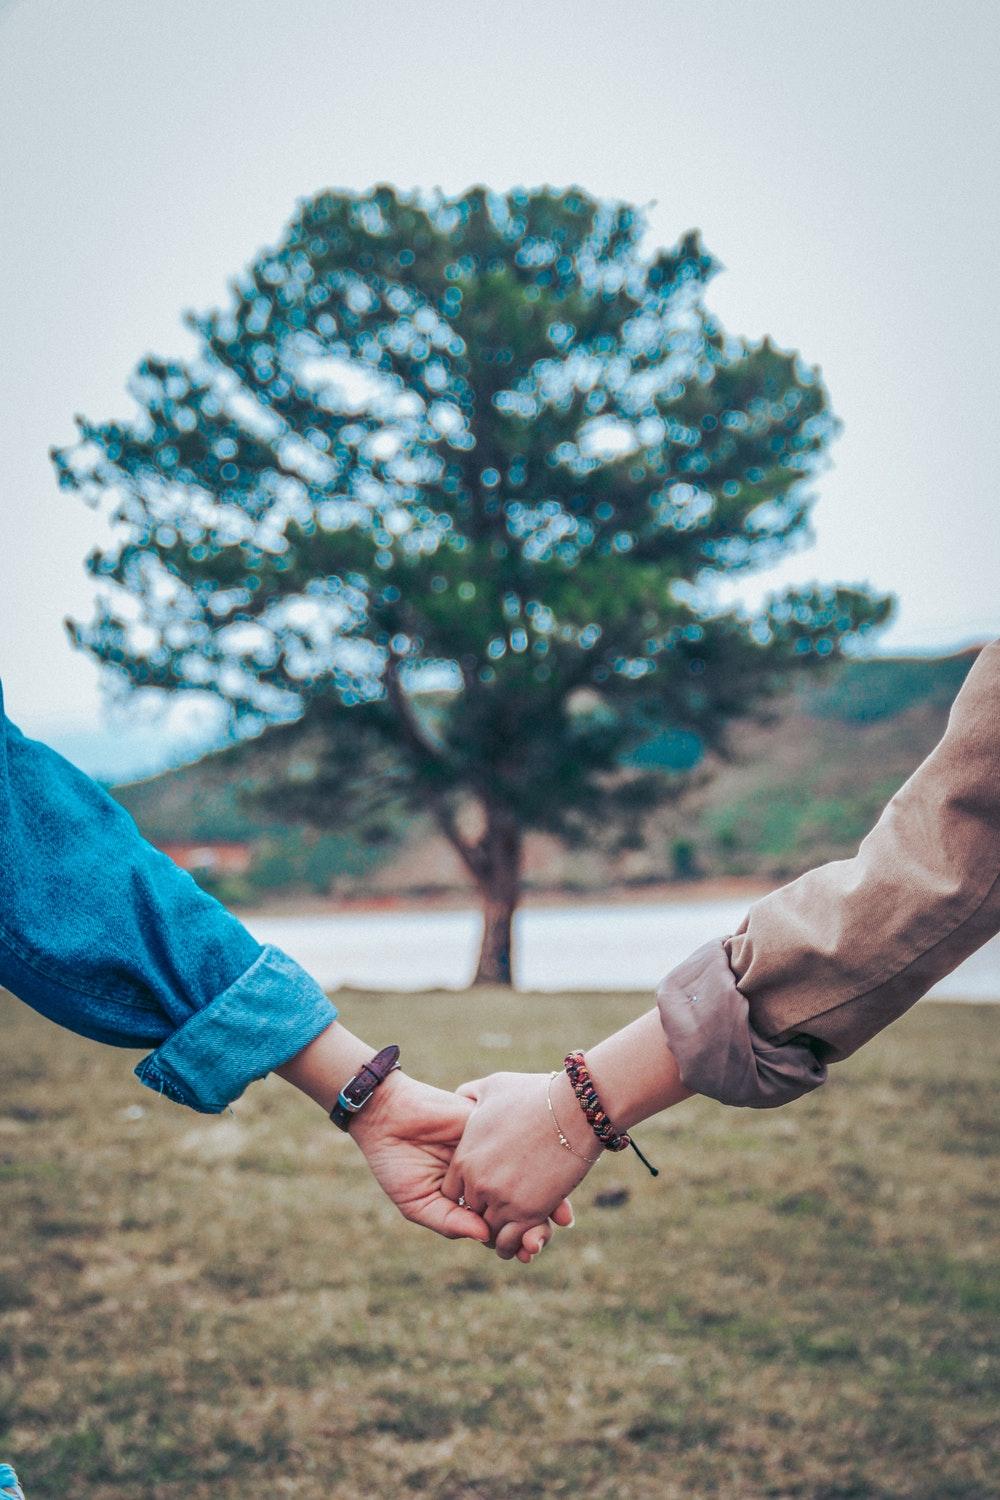 Holding hand, wallpaper, love wallpaper and love background HD